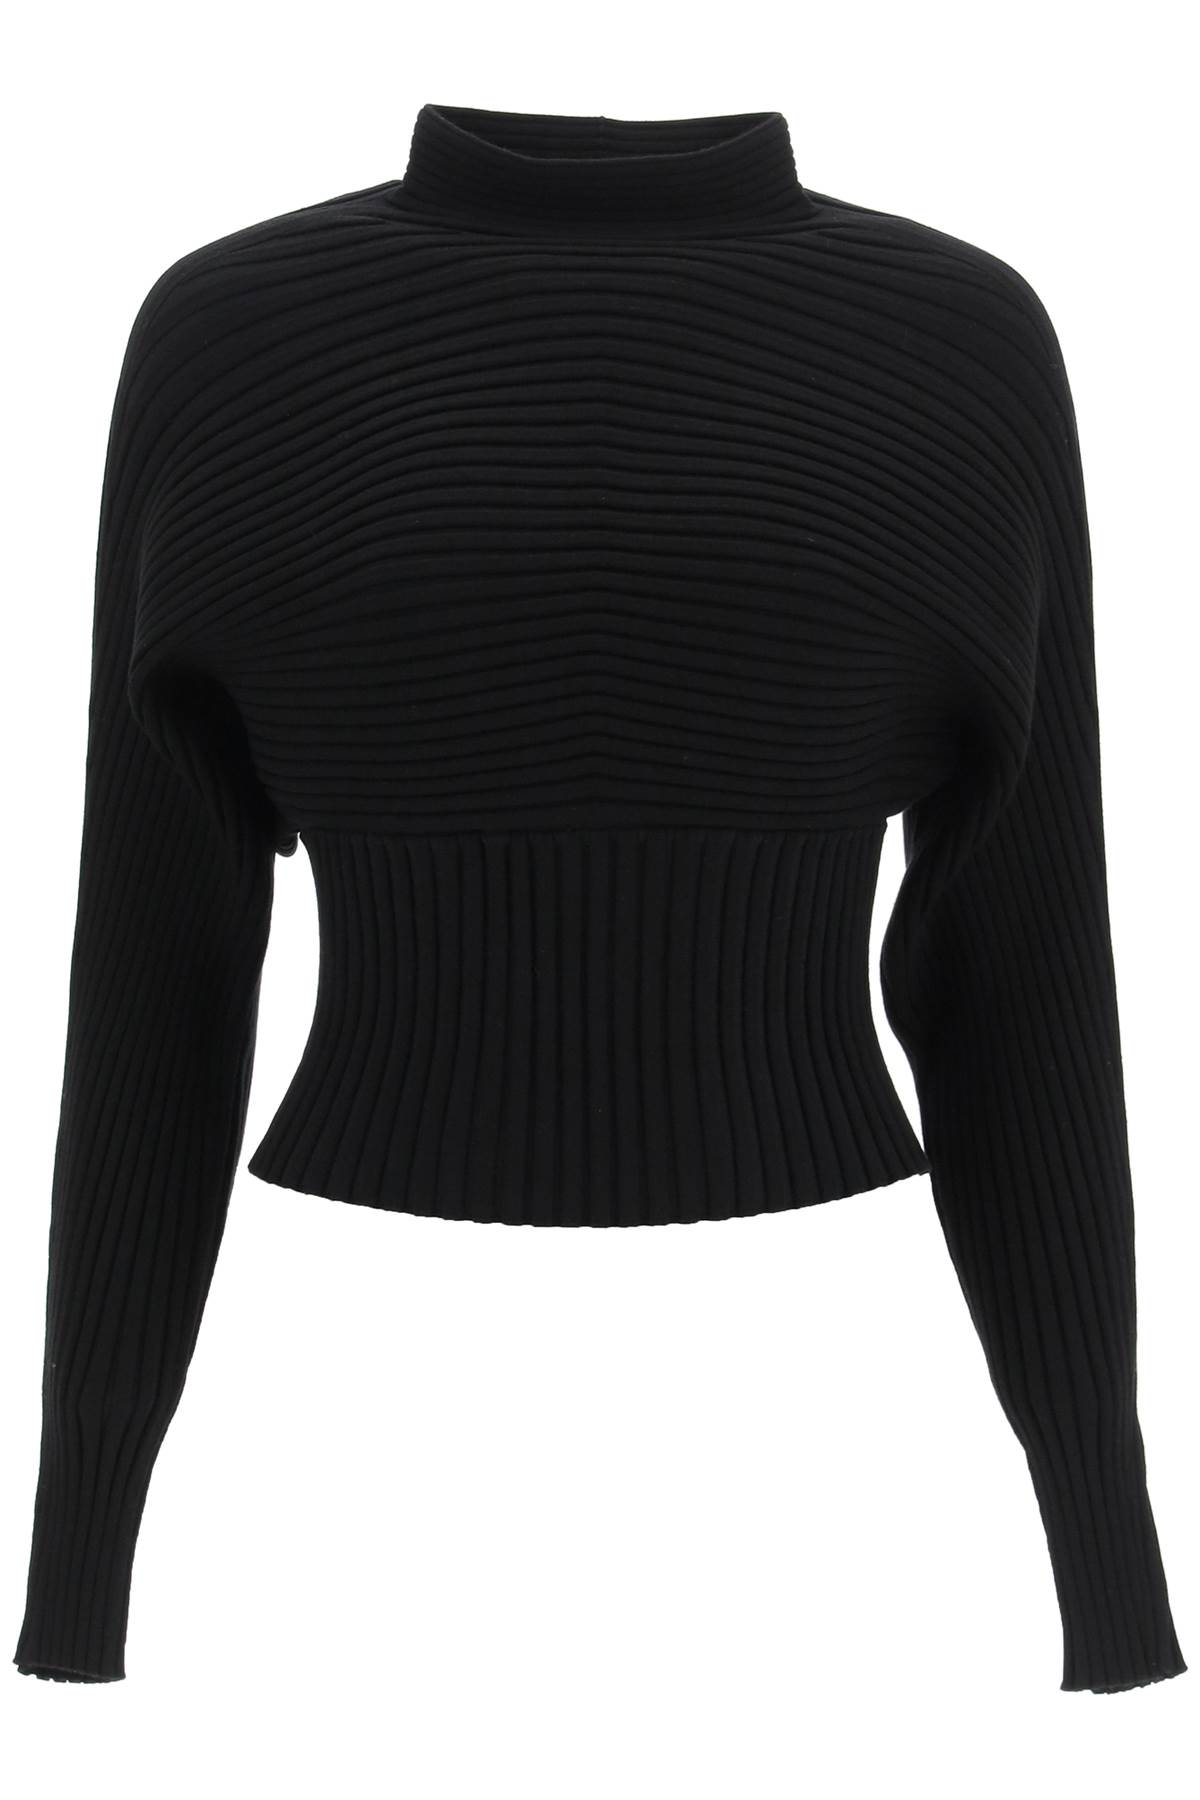 TORY BURCH RIBBED STRETCH SWEATER WITH DOLMAN SLEEVES